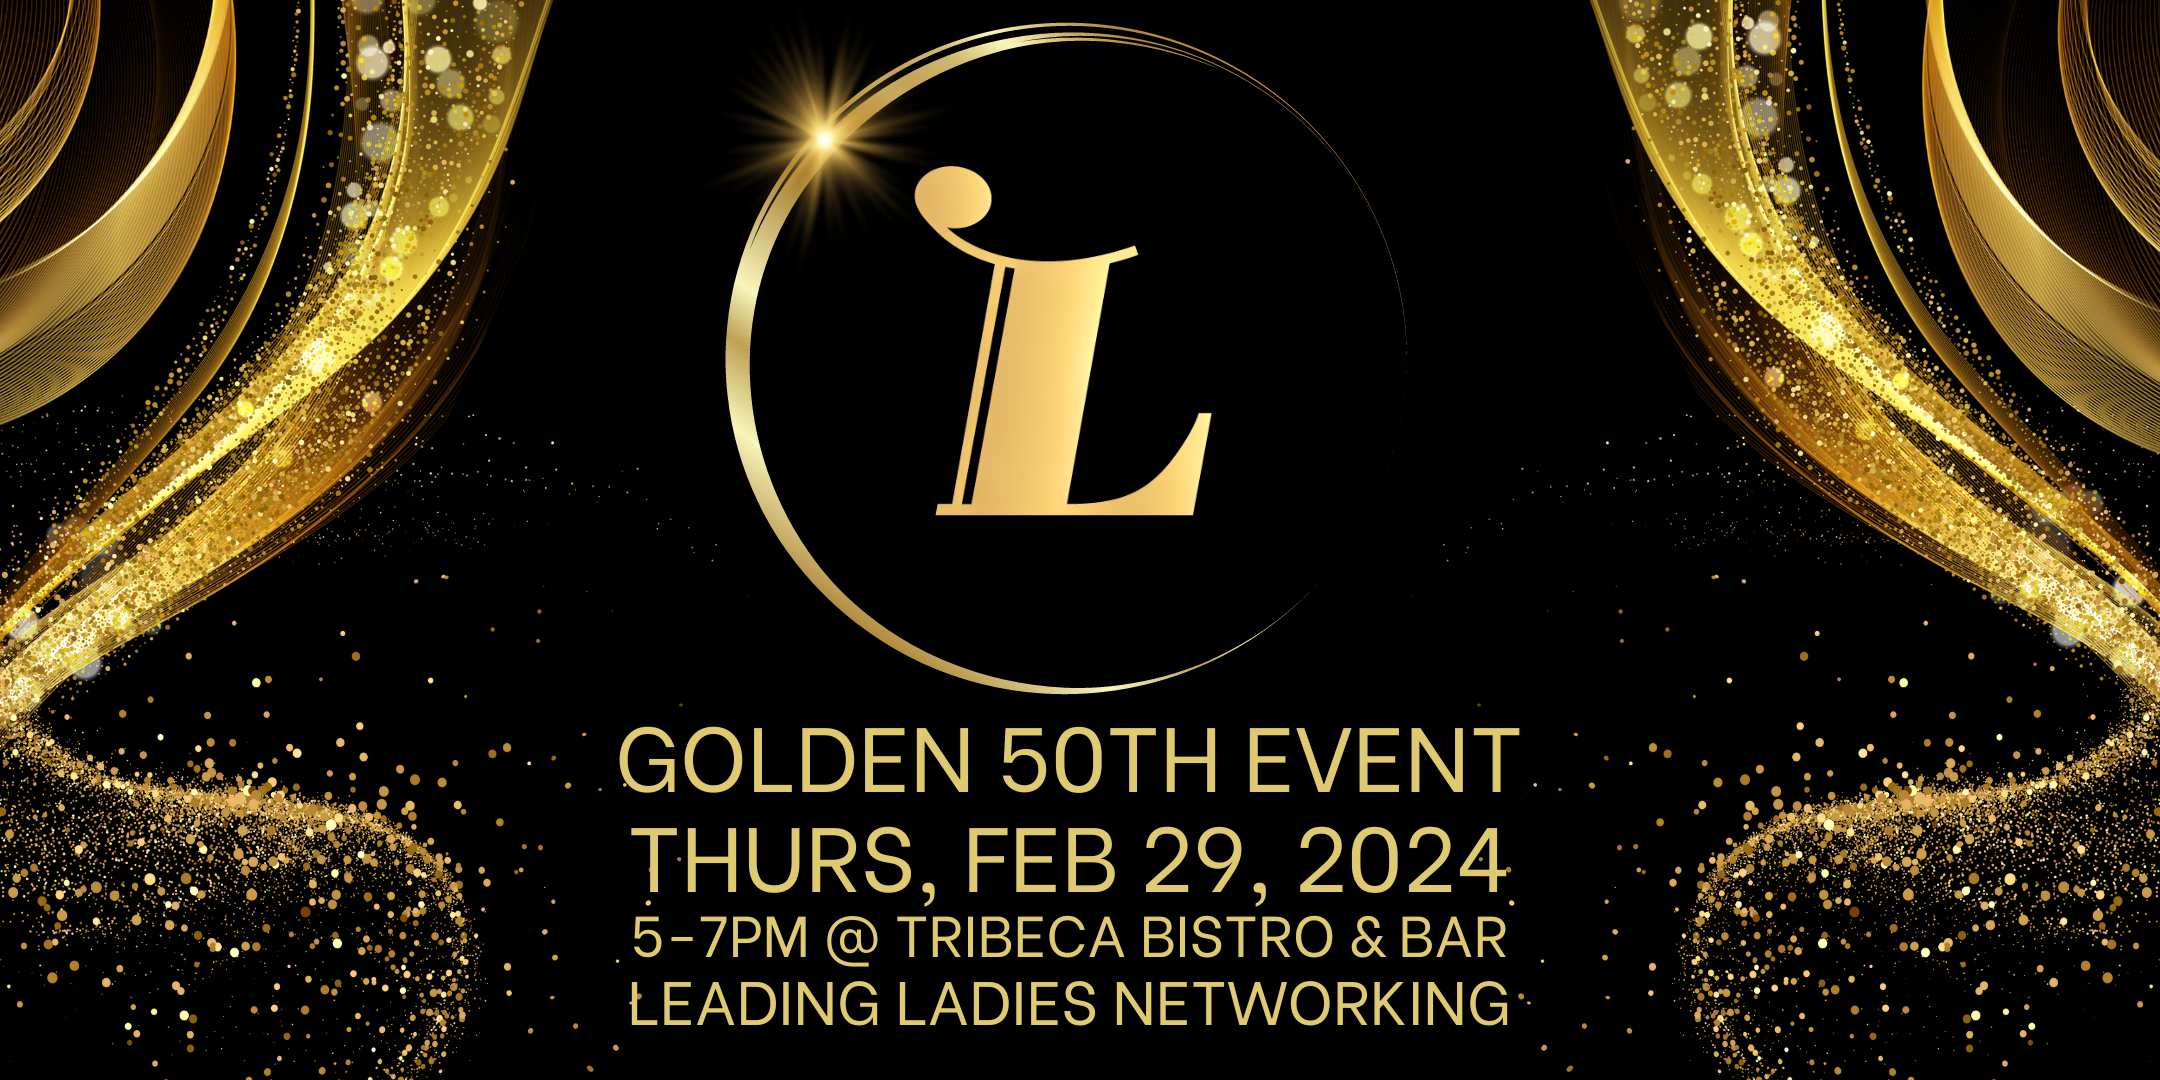 Leading Ladies Networking - 50th Event